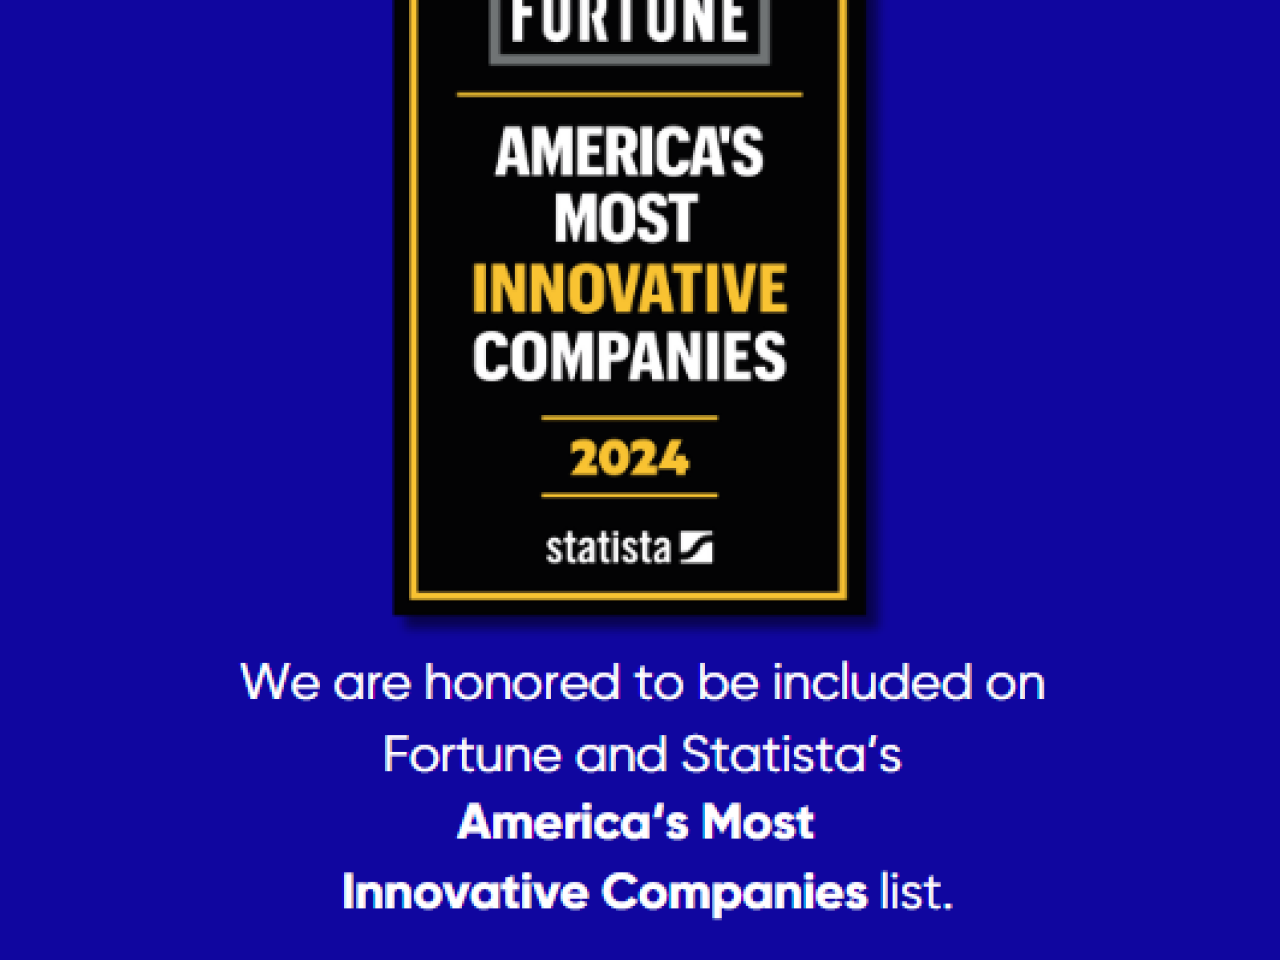 "Fortune, America's Most Innovative Companies 2024, We are honored to be included on Fortune and Statista's America's Most Innovative Companies list"